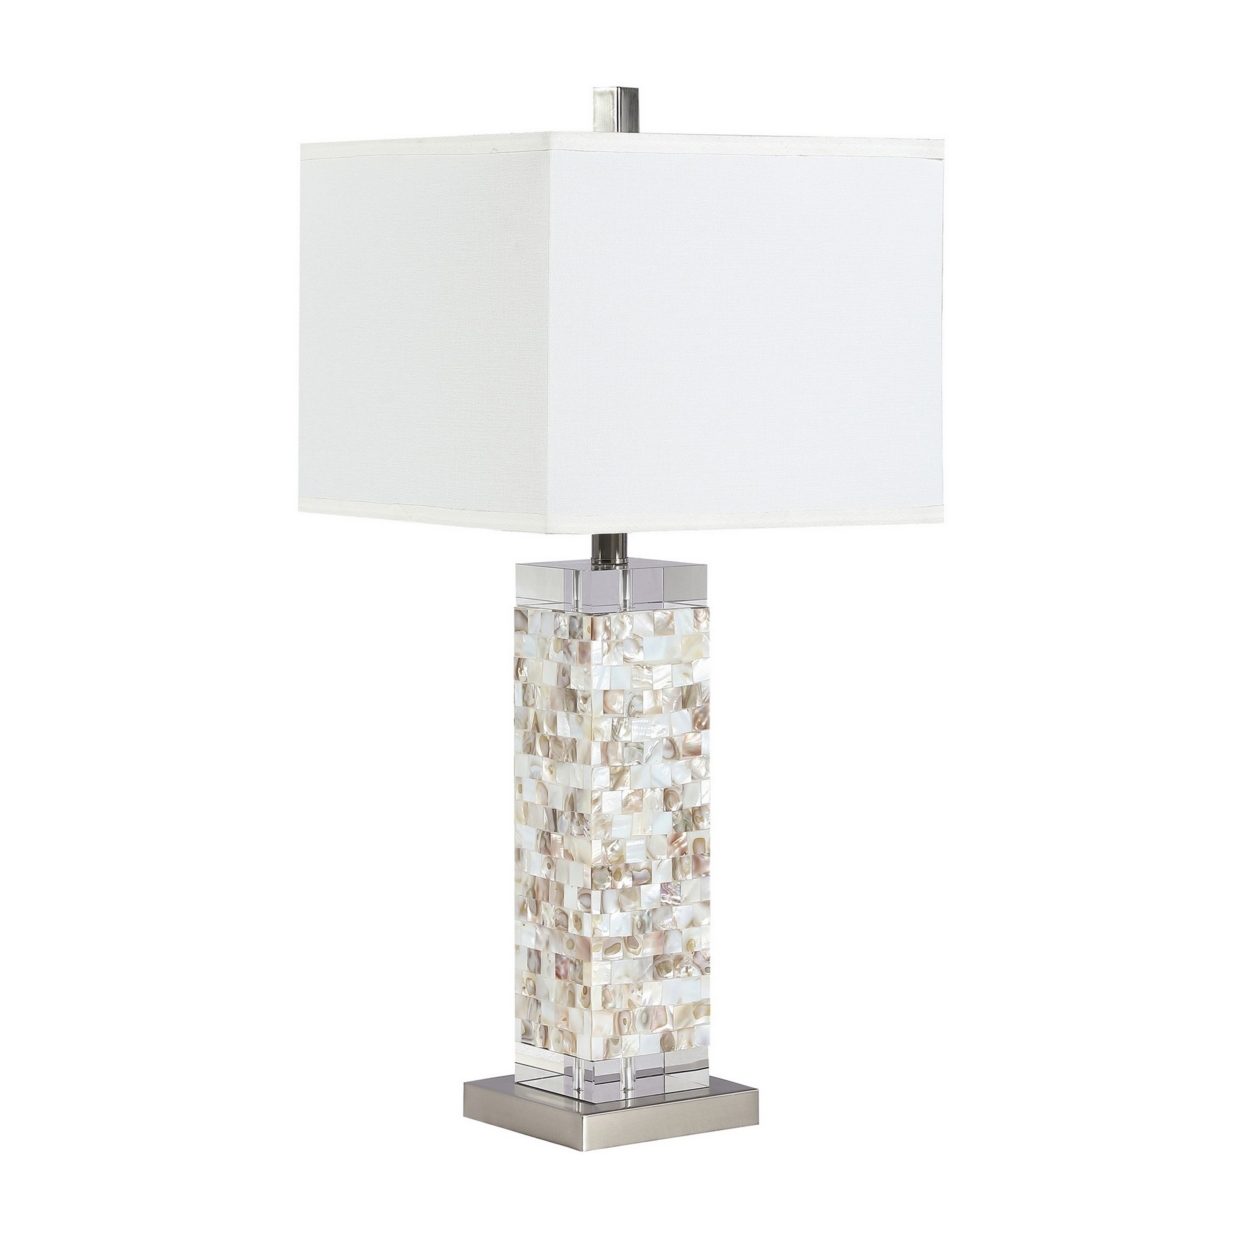 29 Inch Modern Table Lamp, Mother Of Pearl Shell Frame, White, Silver